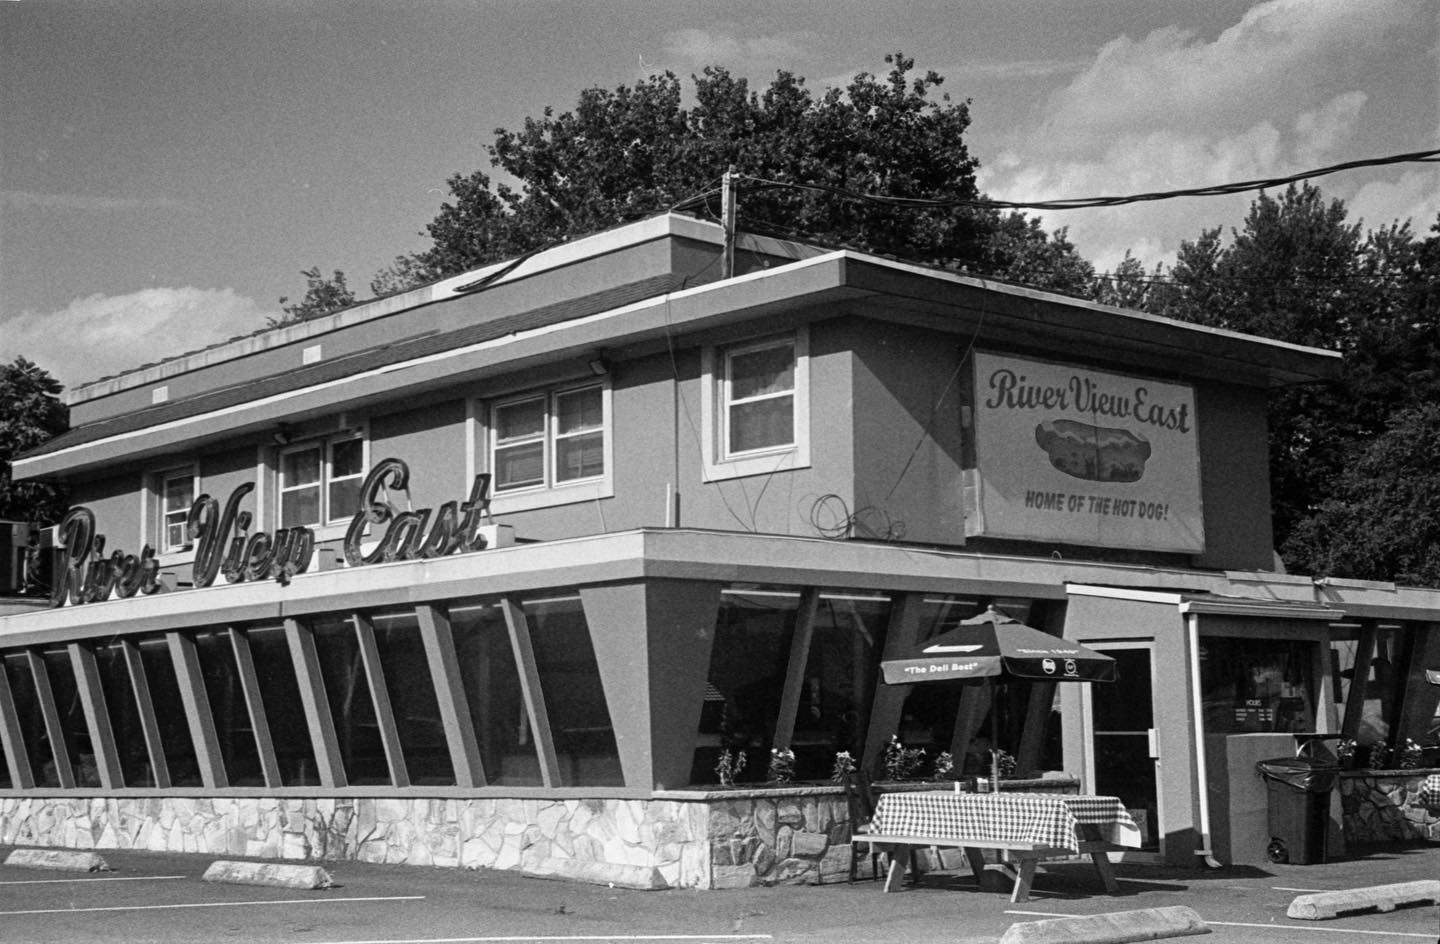 Home of the Hot Dog

In a corner of northern New Jersey, the local delicacy is a grilled hot dog covered in onions, mustard, and chili. This is referred to for some reason as a Hot Texas Wiener. River View East in Elmwood Park is one of the classic spots that specializes in this gastronomic experience. Iâve eaten here often, as it is about a mile from where my wife grew up. But Iâve never had one of their Hot Texas Wieners. Going to have to rectify that oversight at some point. #rollfilmweek #rollfilmweek2020 #film #filmphotography #contaxiii #eastman5222 #doublexx